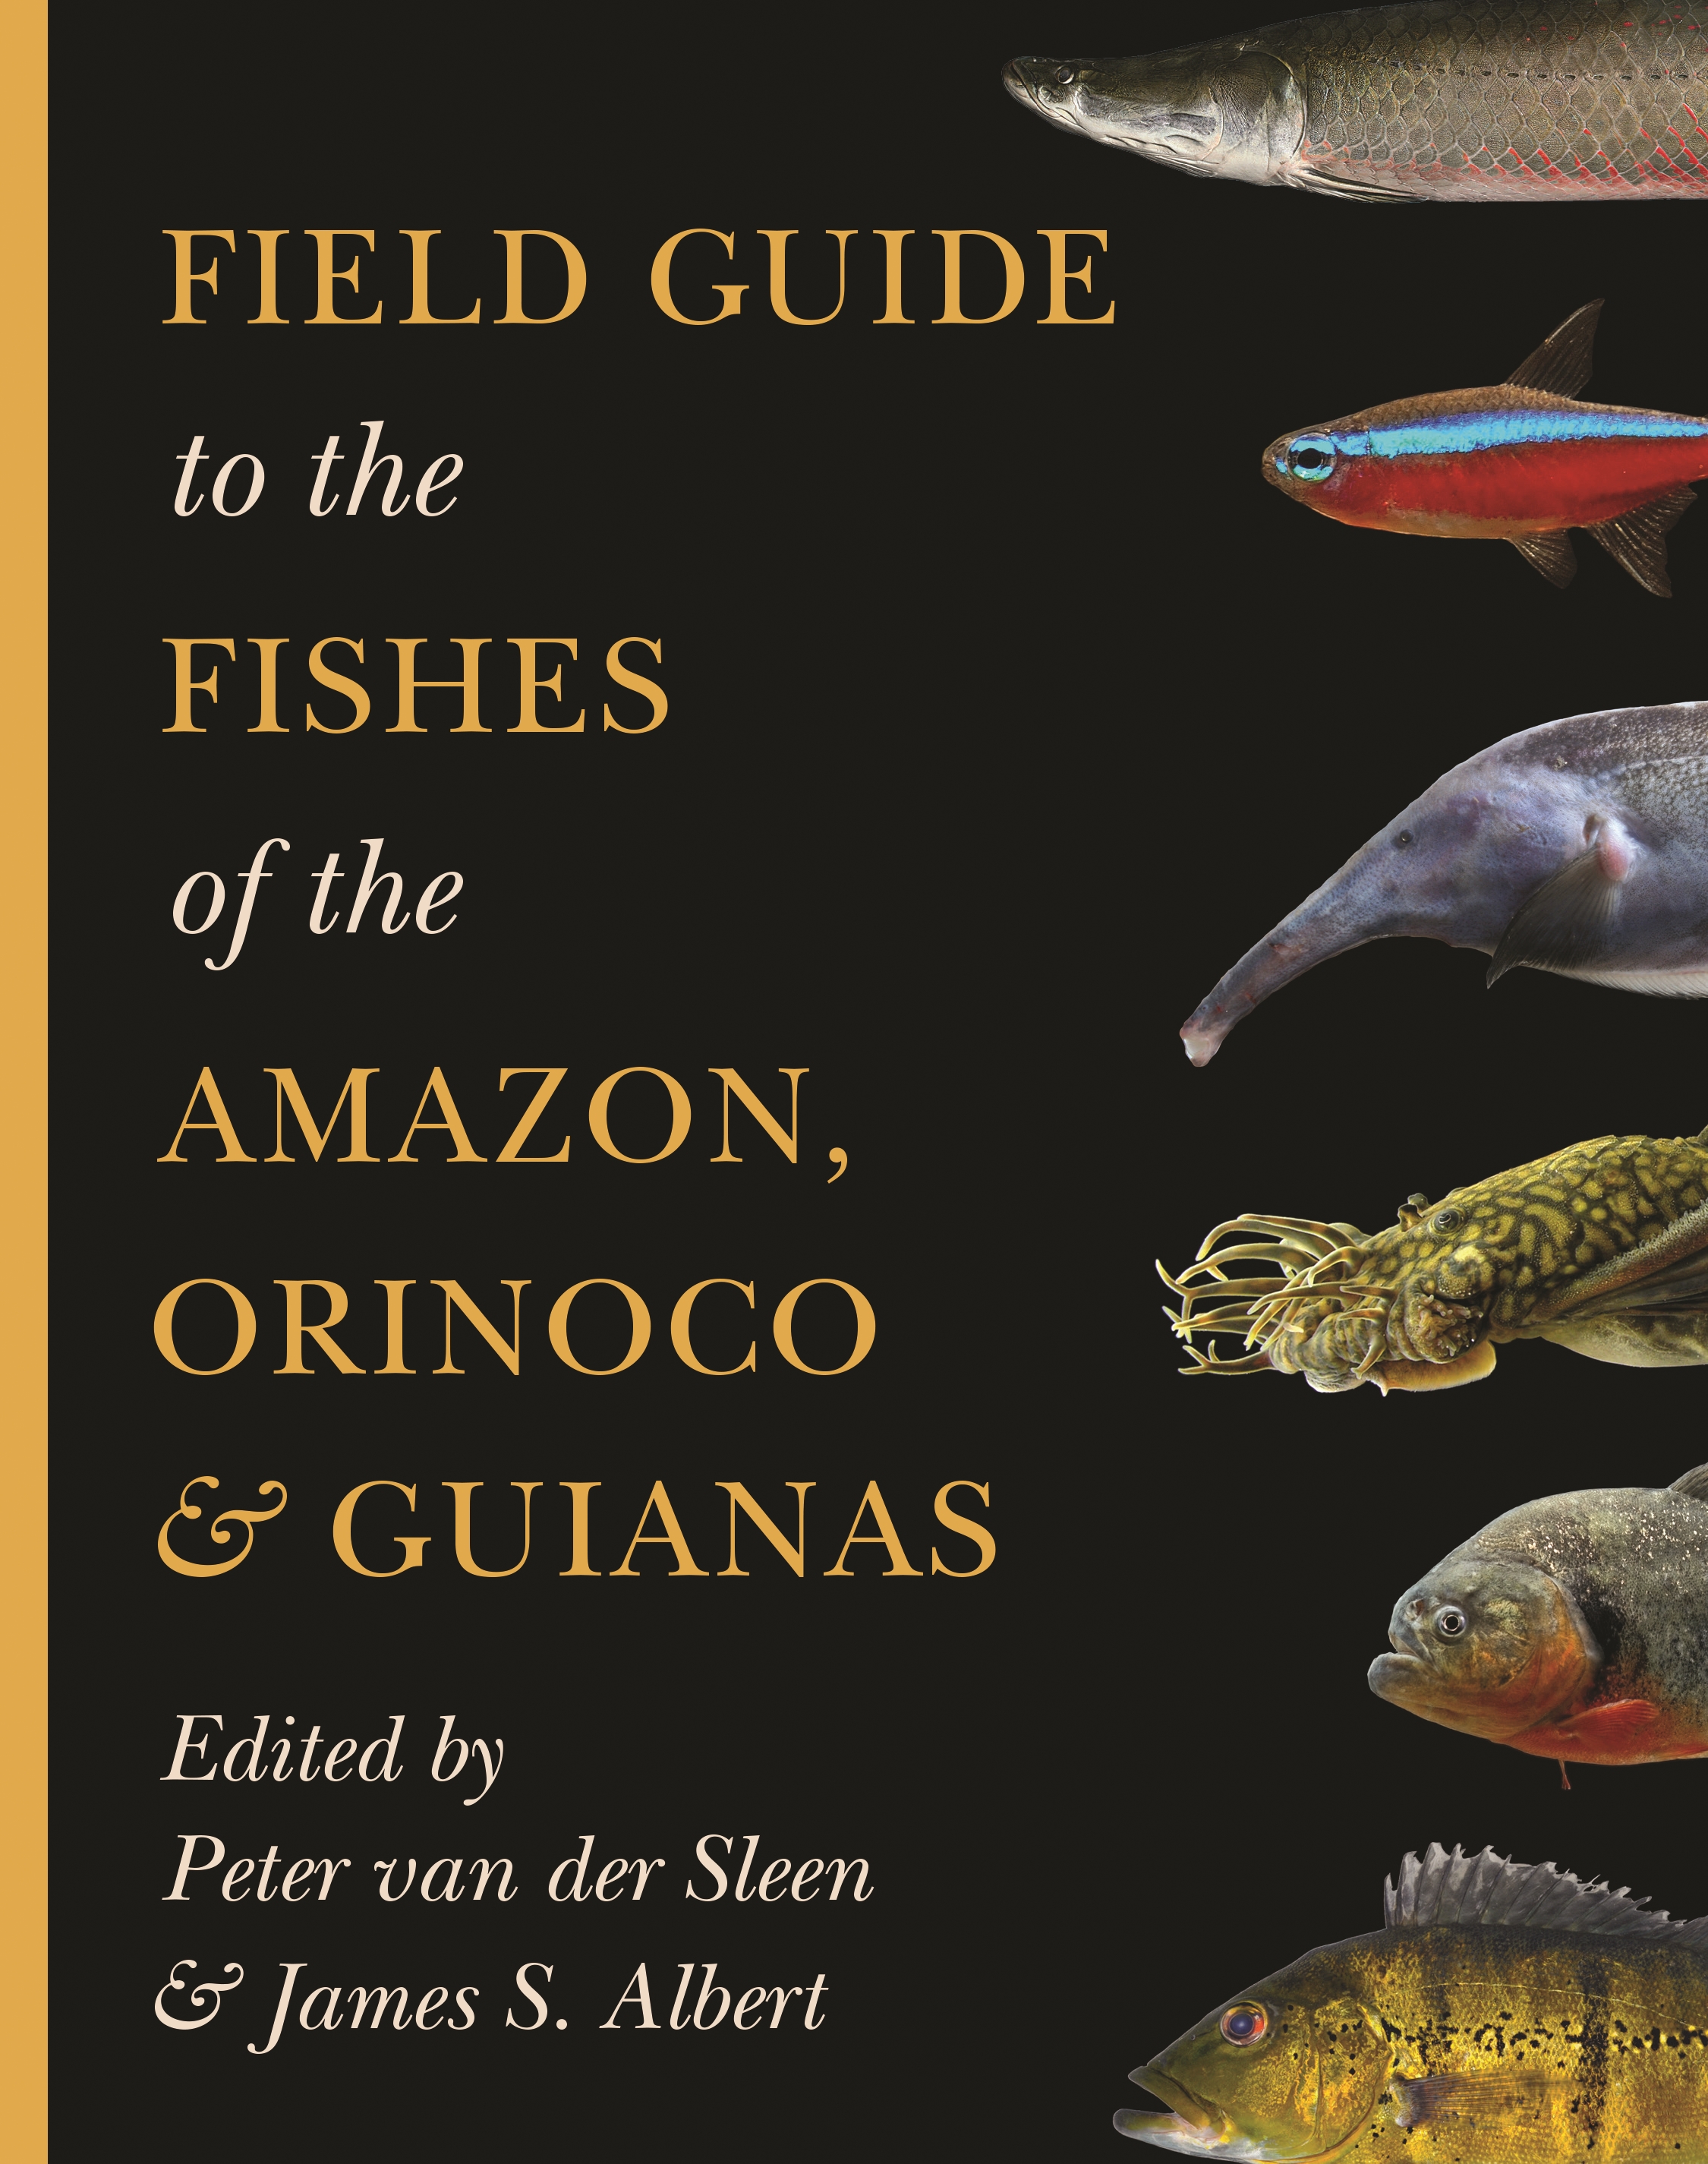 Field Guide to the Fishes of the , Orinoco, and Guianas